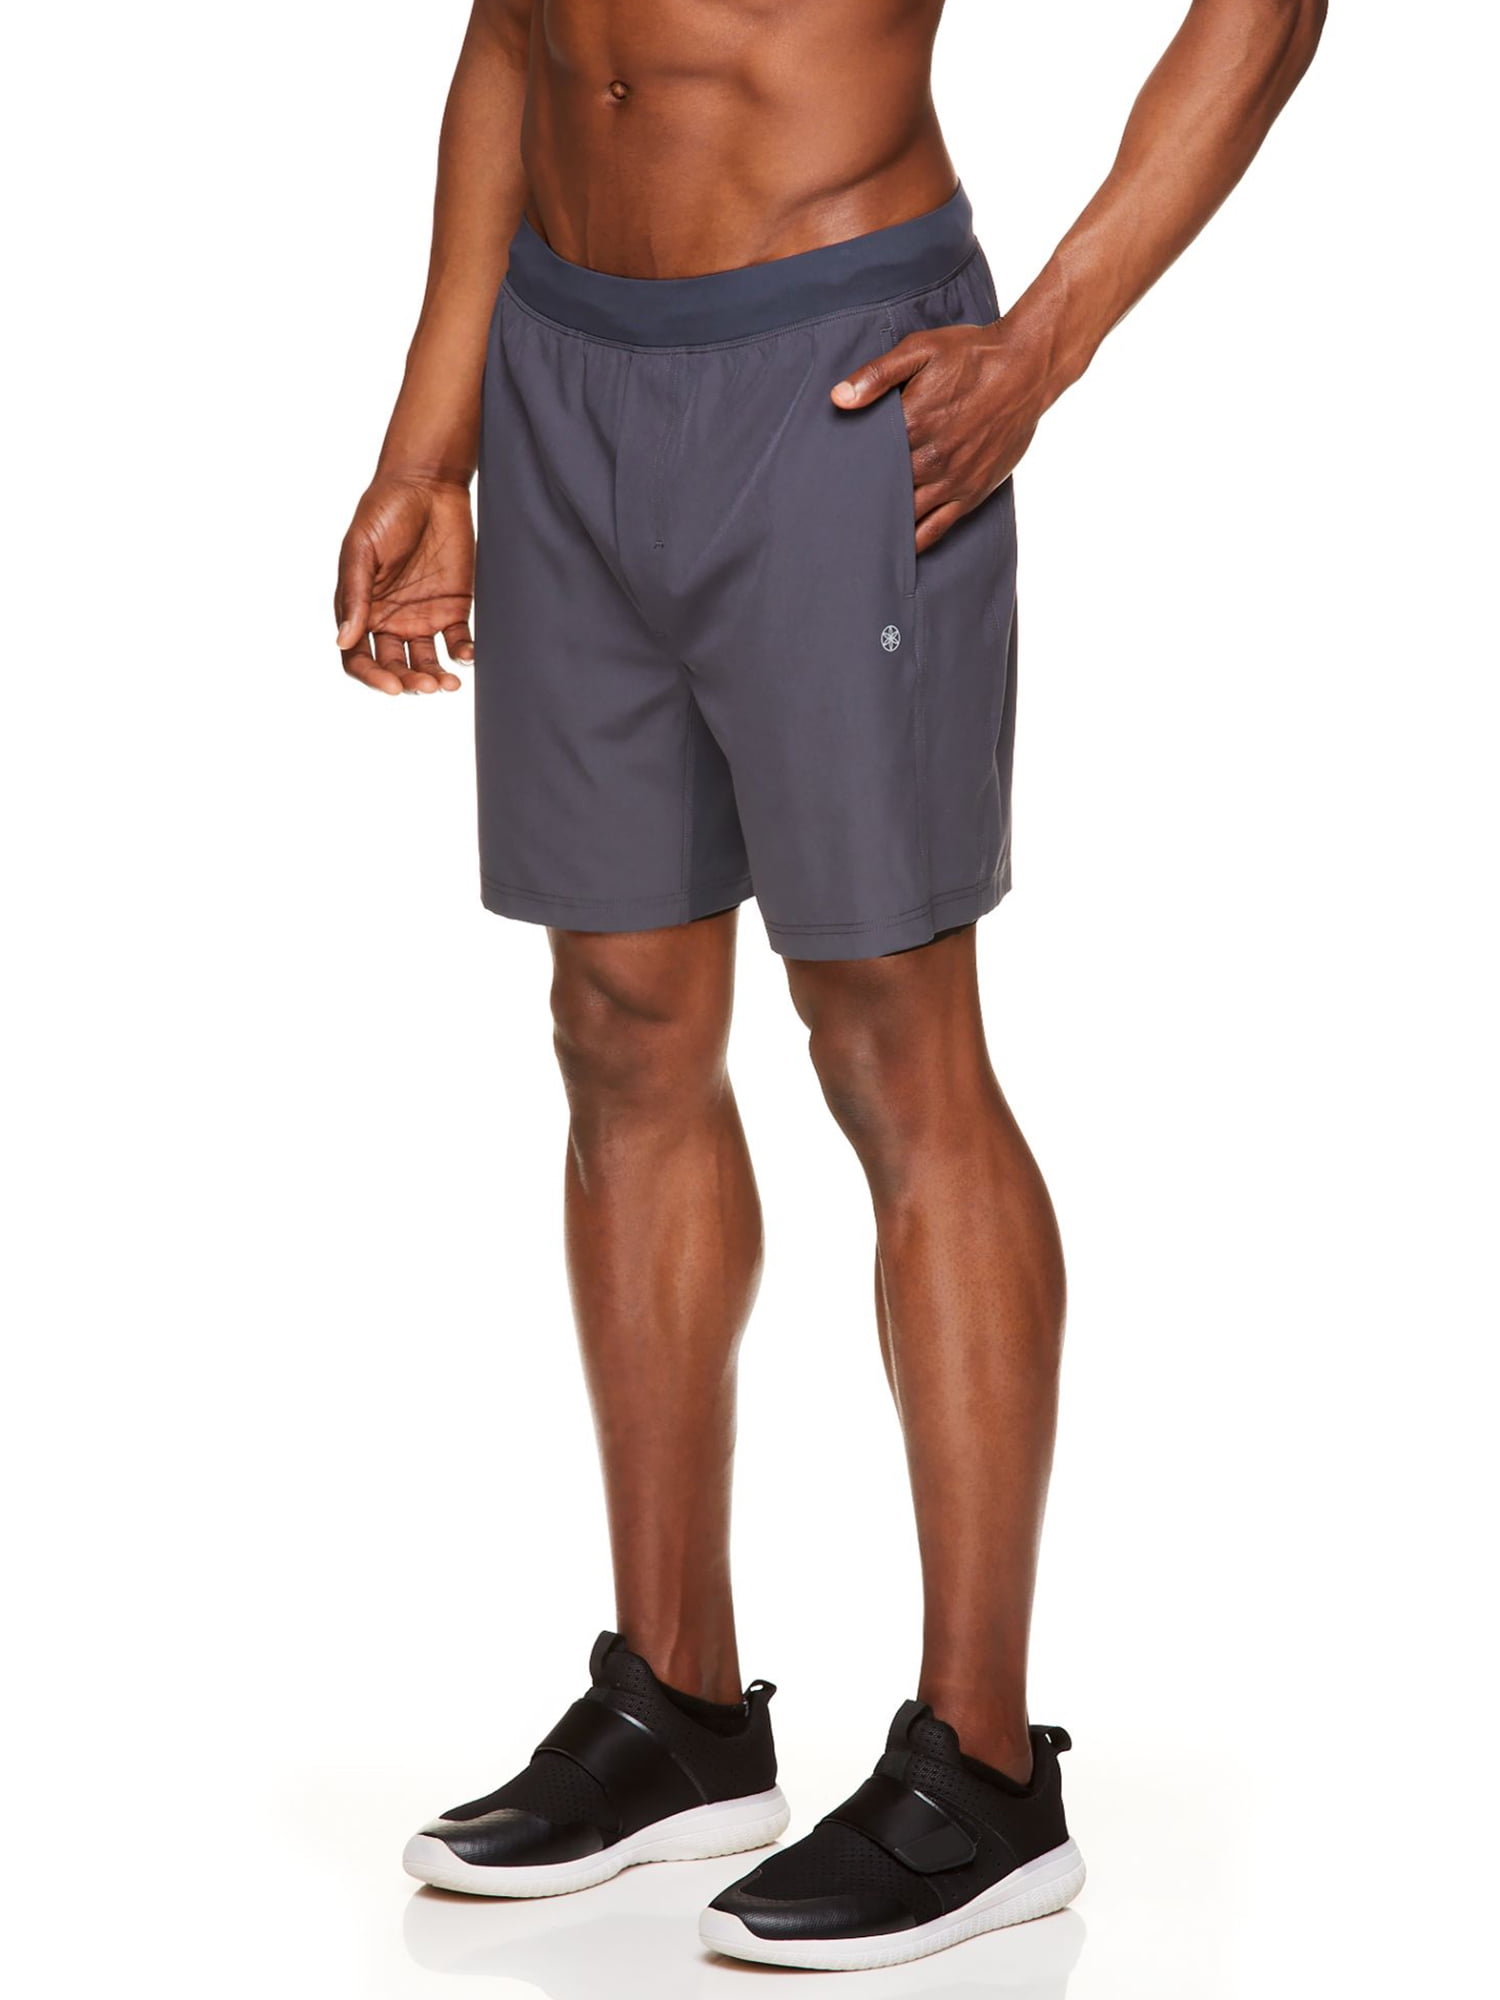 Gaiam Polyester Spandex Active Fit Short (Men's), 1 Count, 1 Pack ...